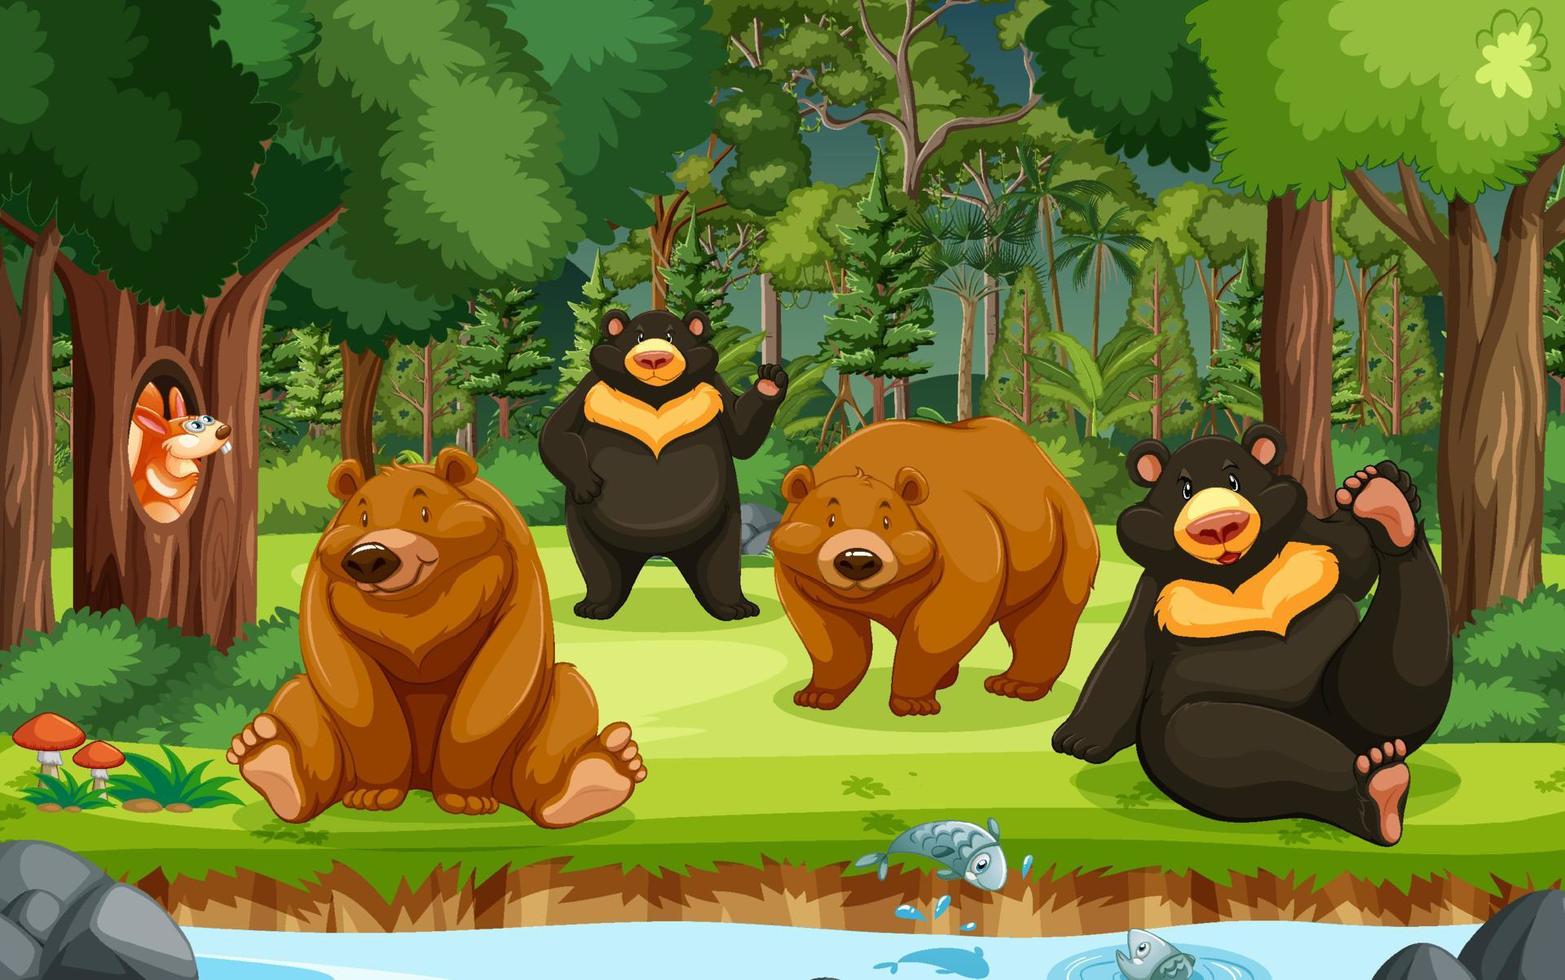 Group of bears in the forest scene vector